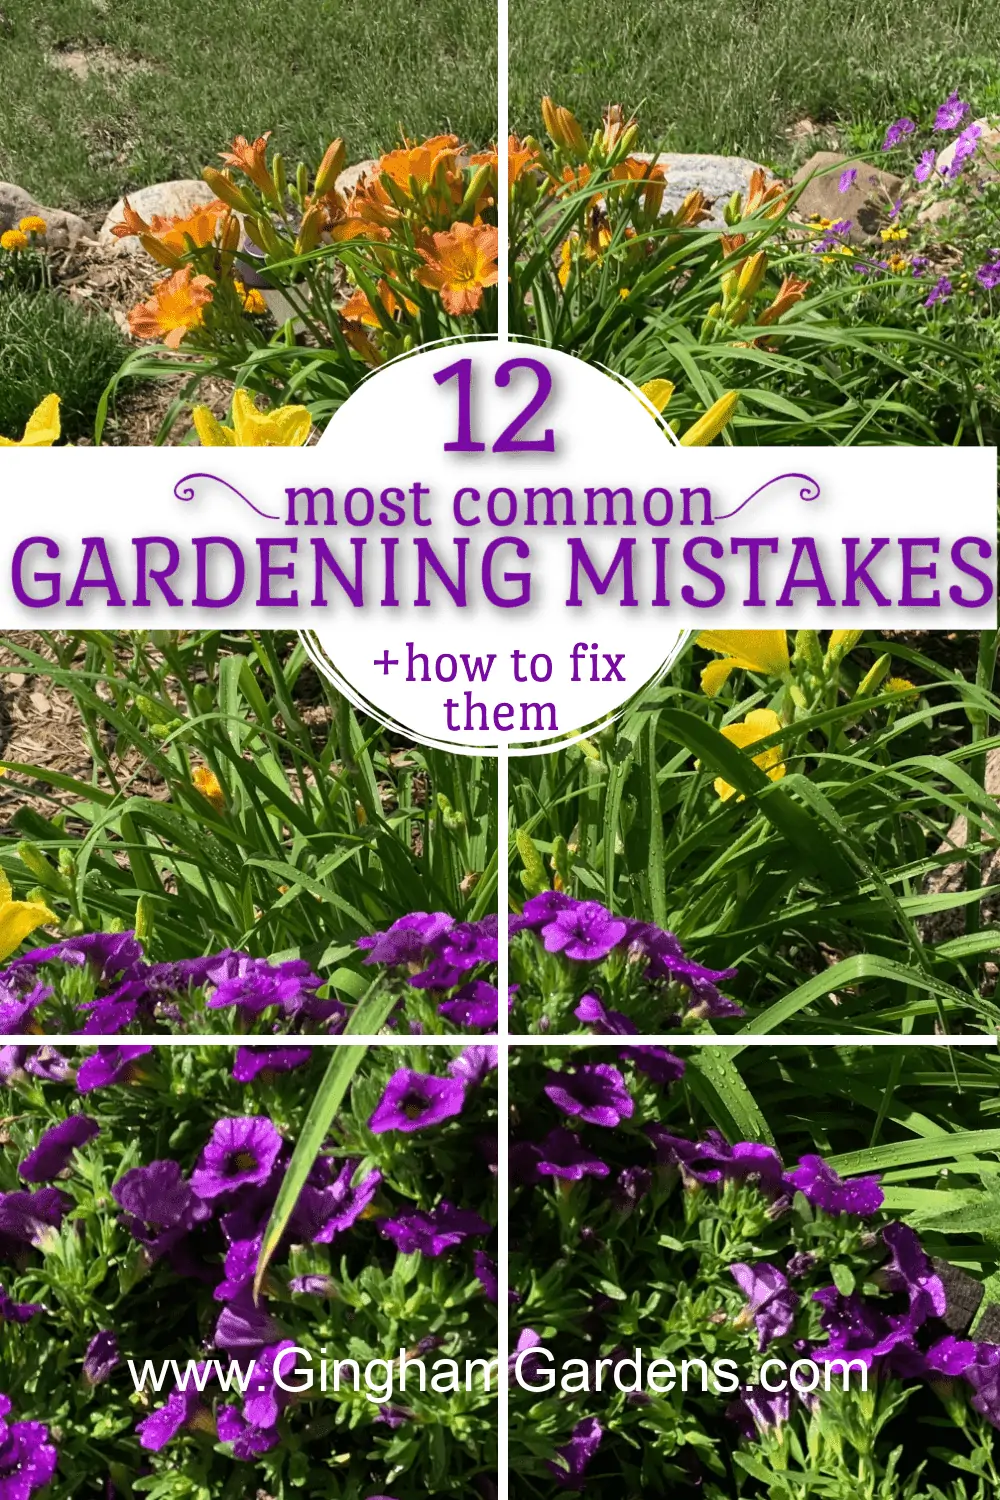 Image of a Flower Garden with text overlay - 12 most common gardening mistakes